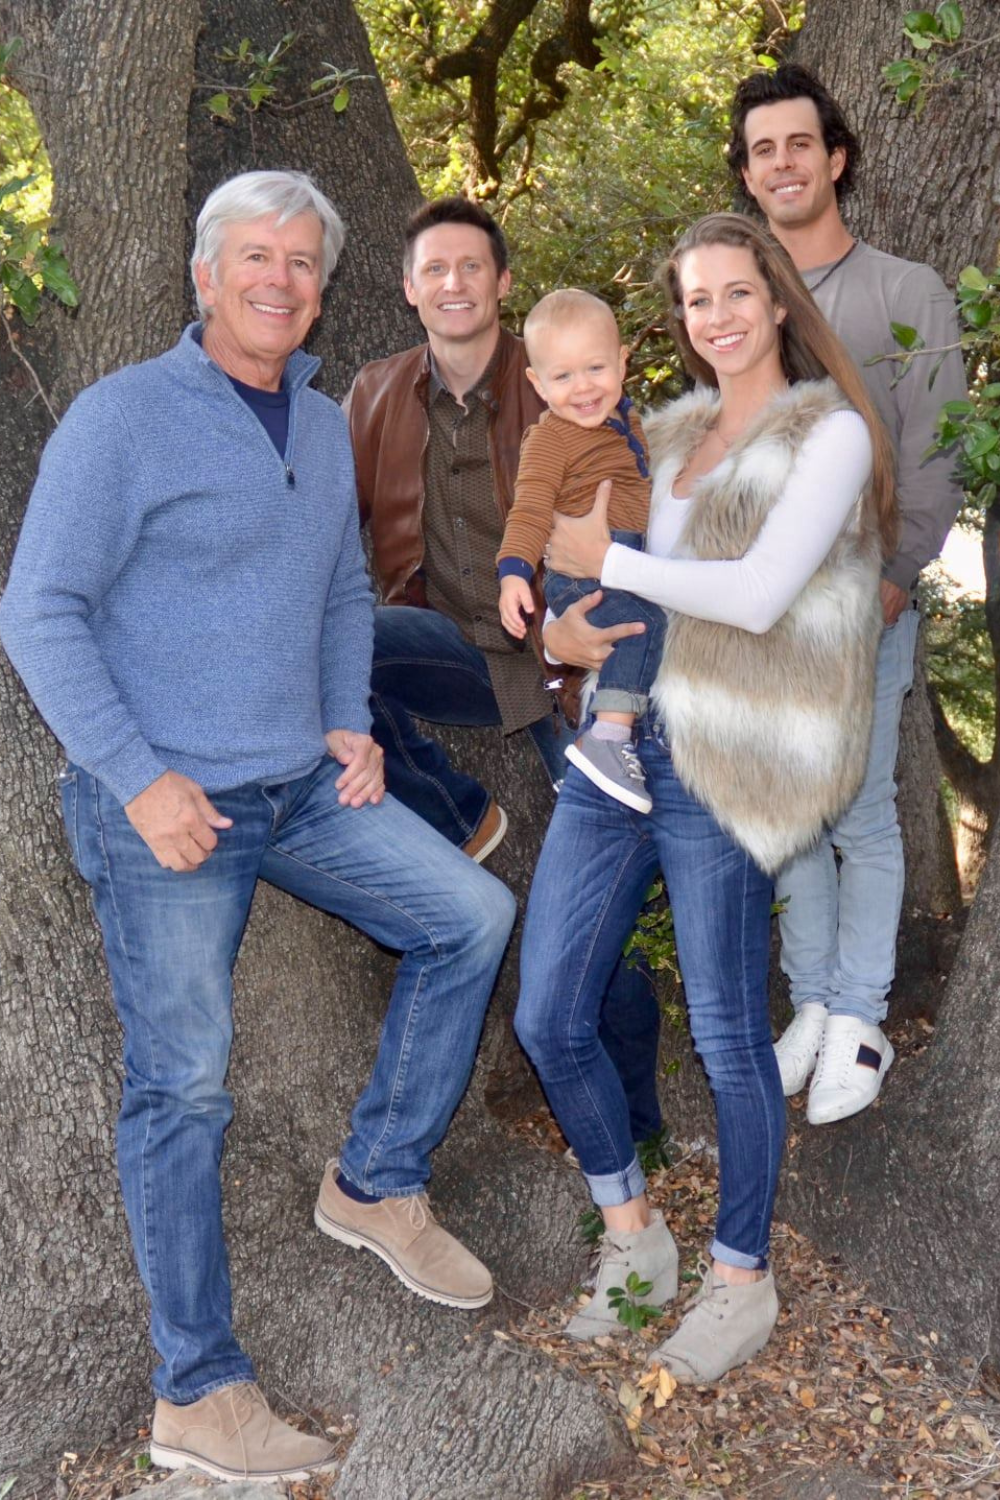 Randy Robertson With Daughter, Son-In-Law, Grandchild And Son